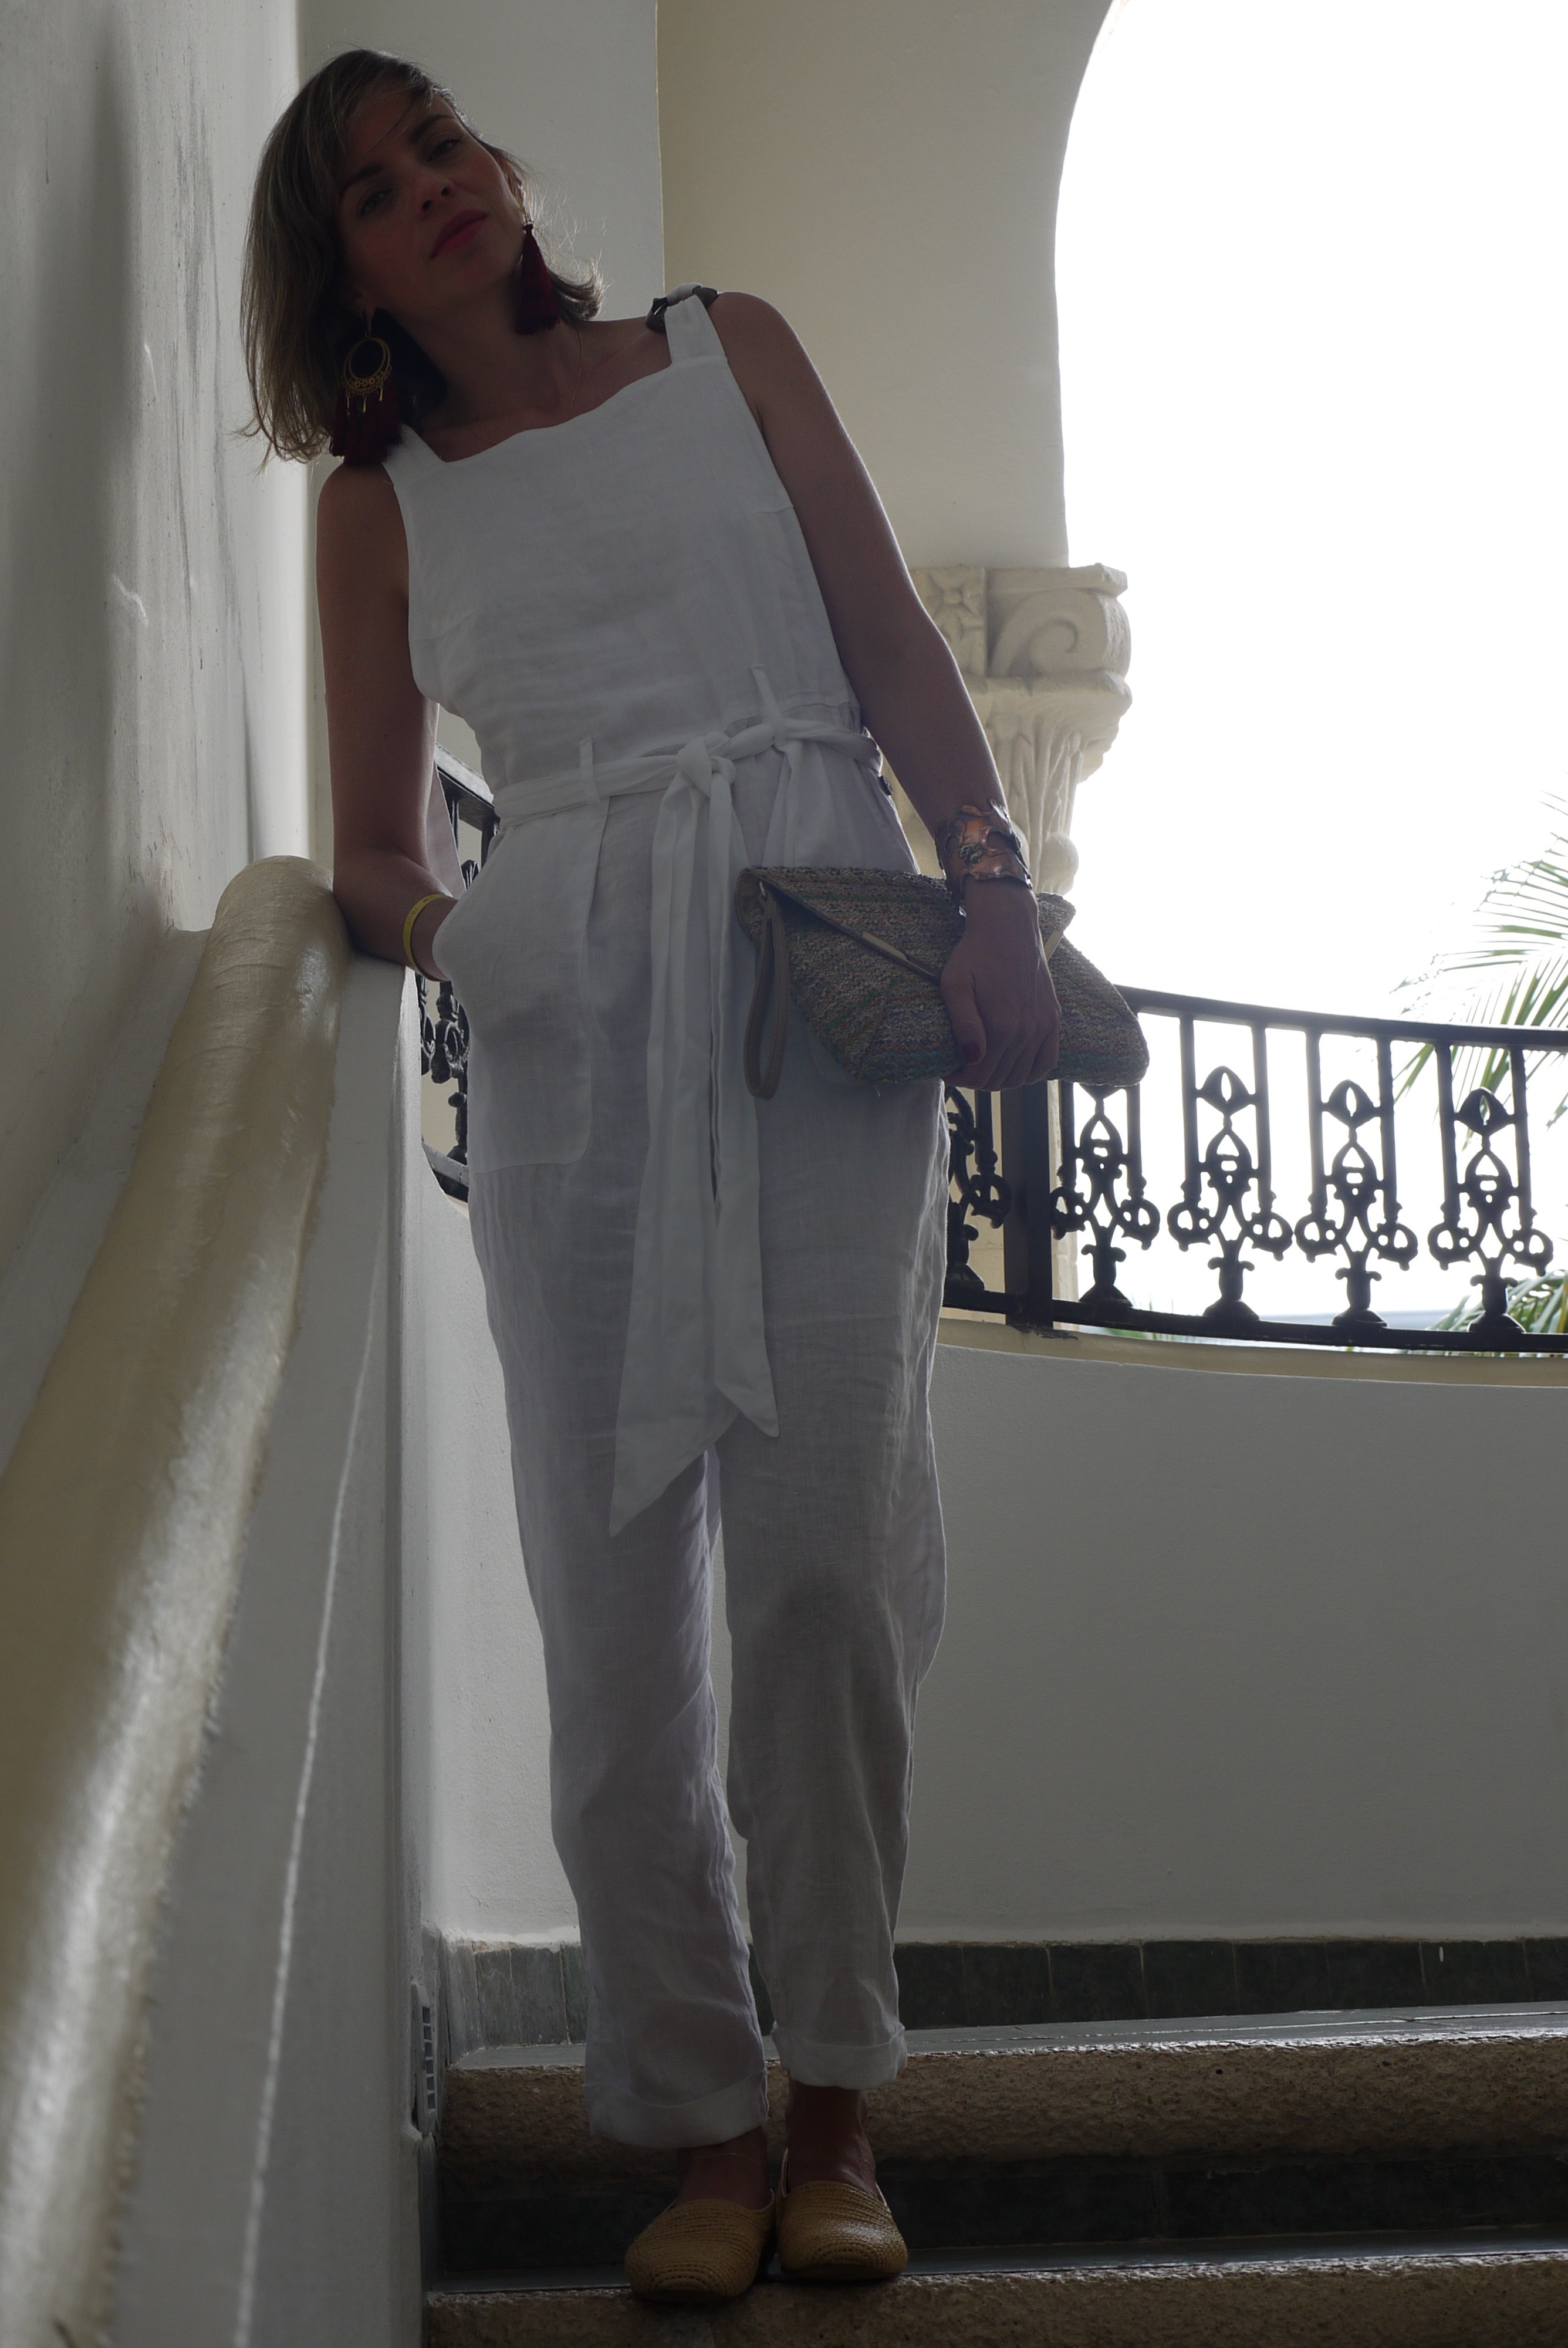 Alba Marina Otero fashion blogger from Mylovelypeople blog shares with you her trip to Cancun and what to pack in your suitcase for this kind of weather as a white linen jumpsuits